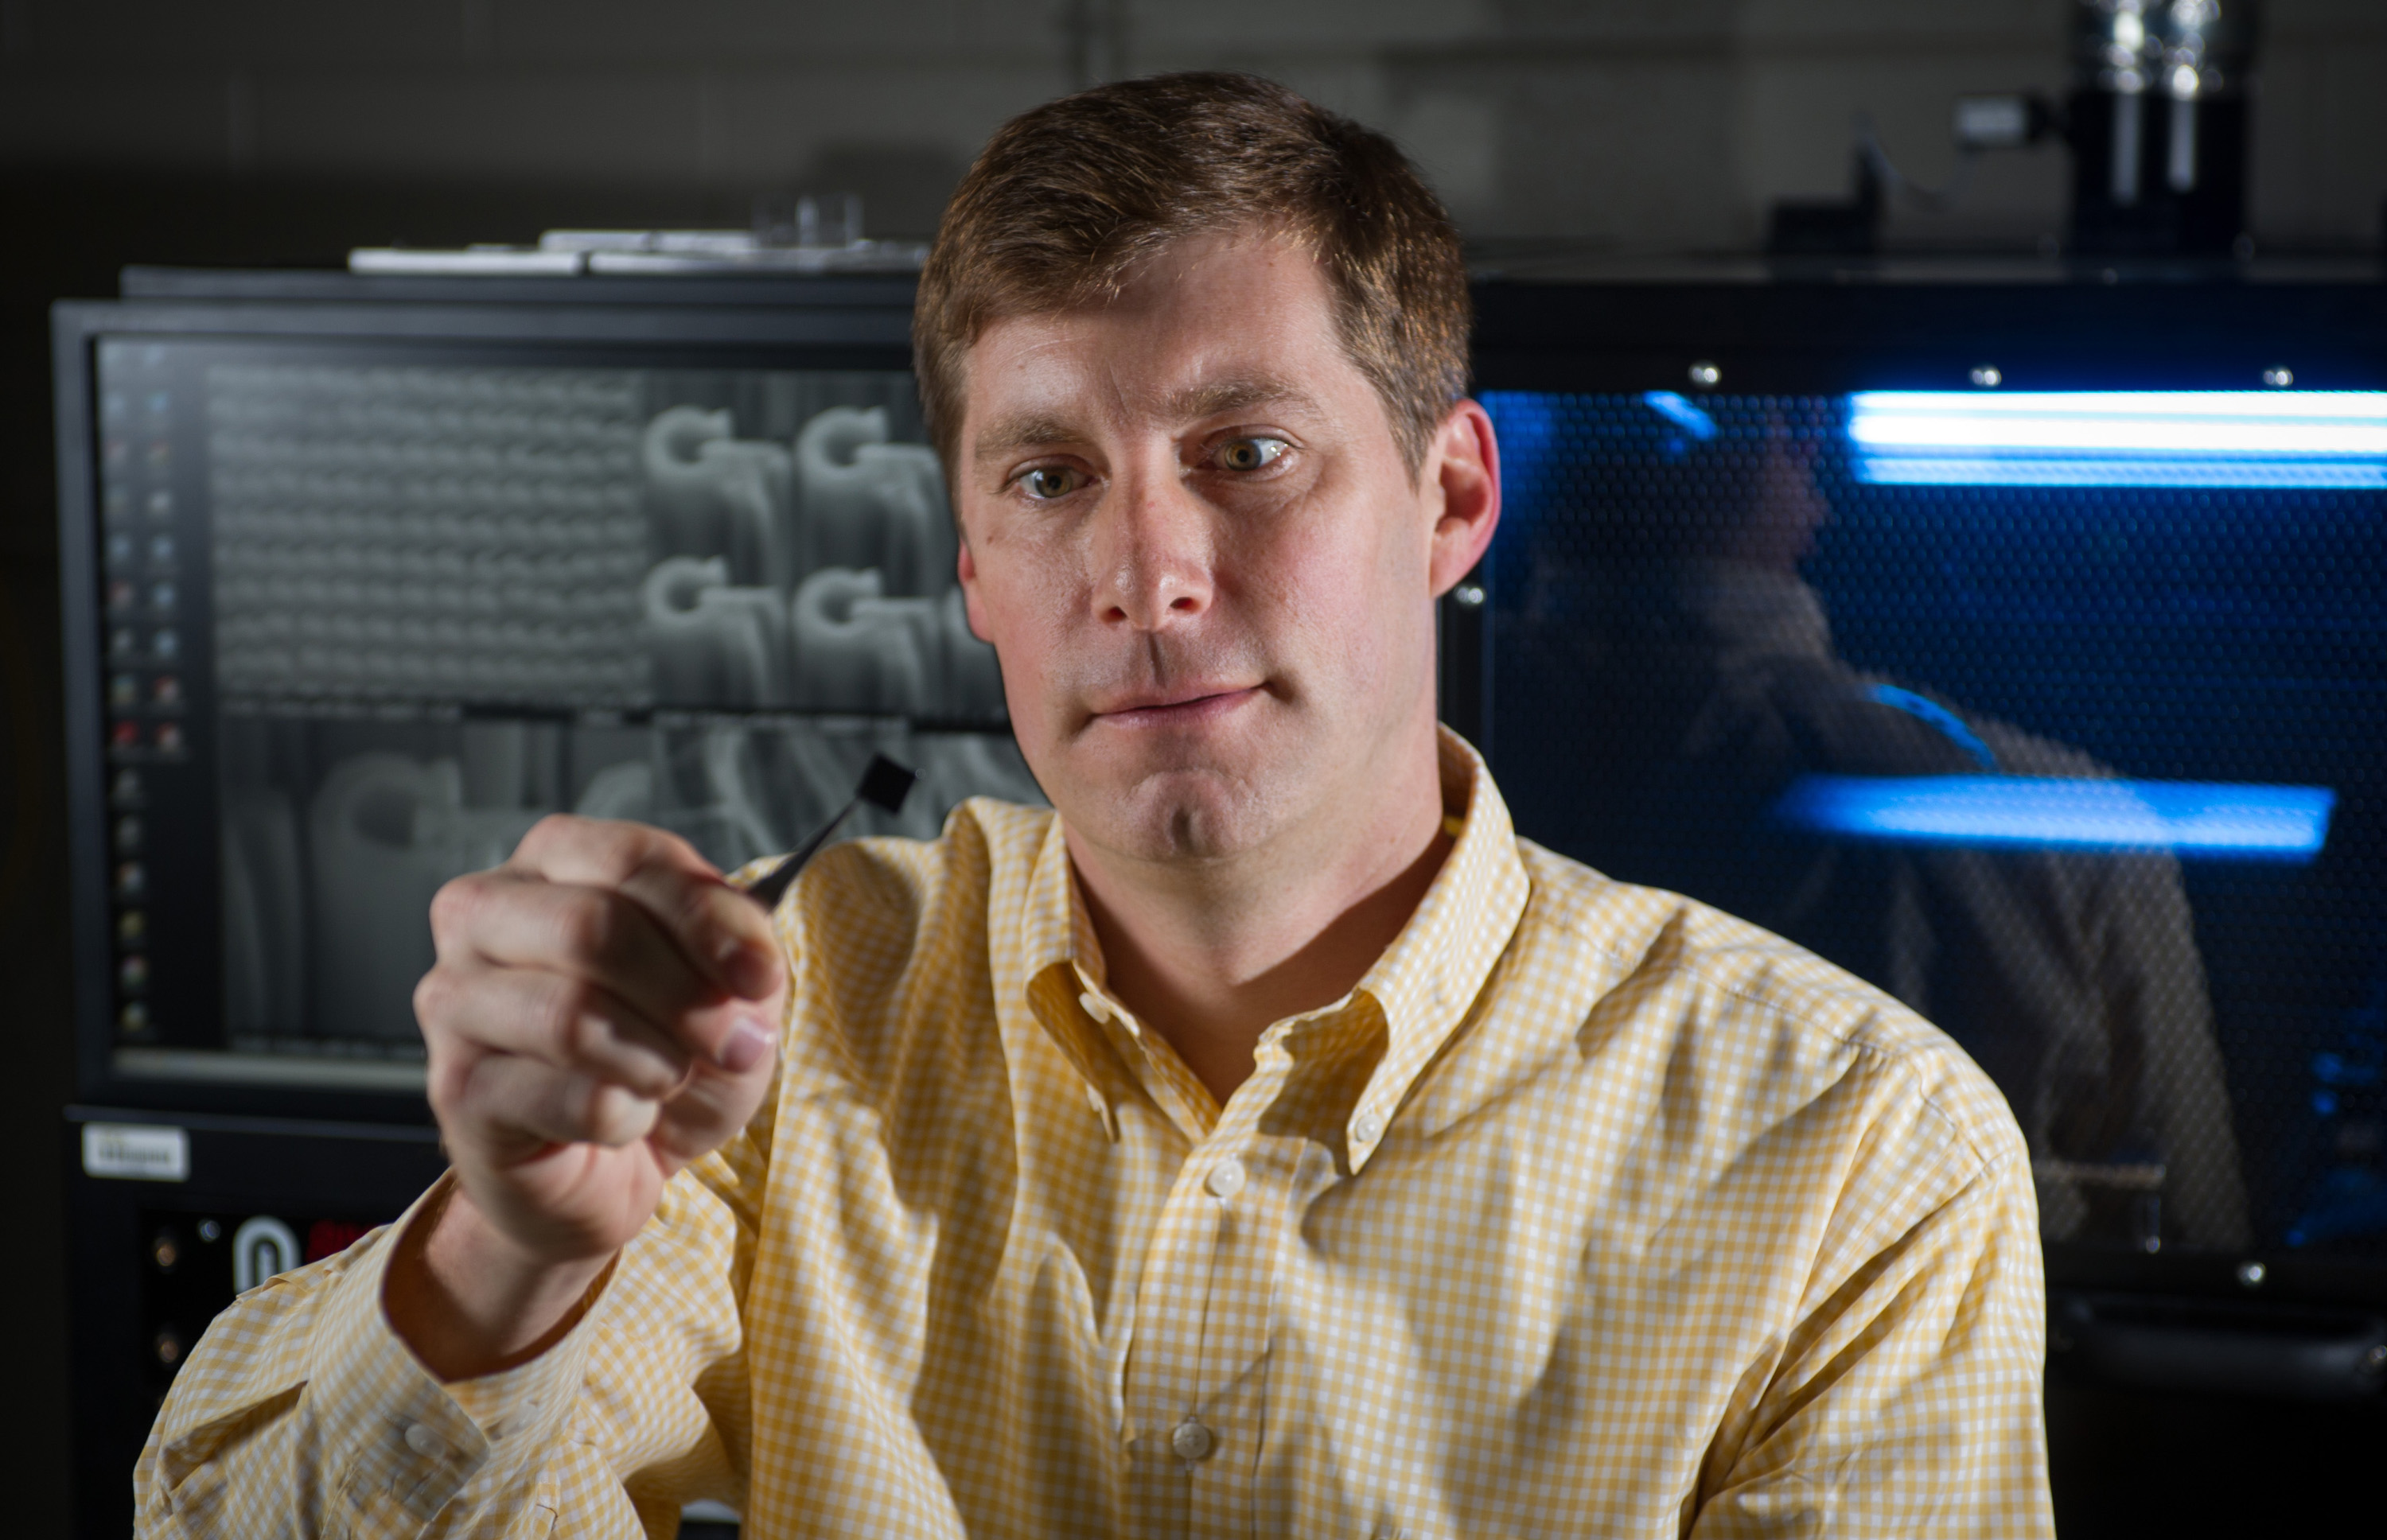 Jud Ready, a principal research engineer at the Georgia Tech Research Institute, holds a chip containing bundles of carbon nanotubes grown in pits. The nanotubes are being tested for potential use in future electrically-powered ion propulsion systems. (Georgia Tech Photo: Rob Felt)